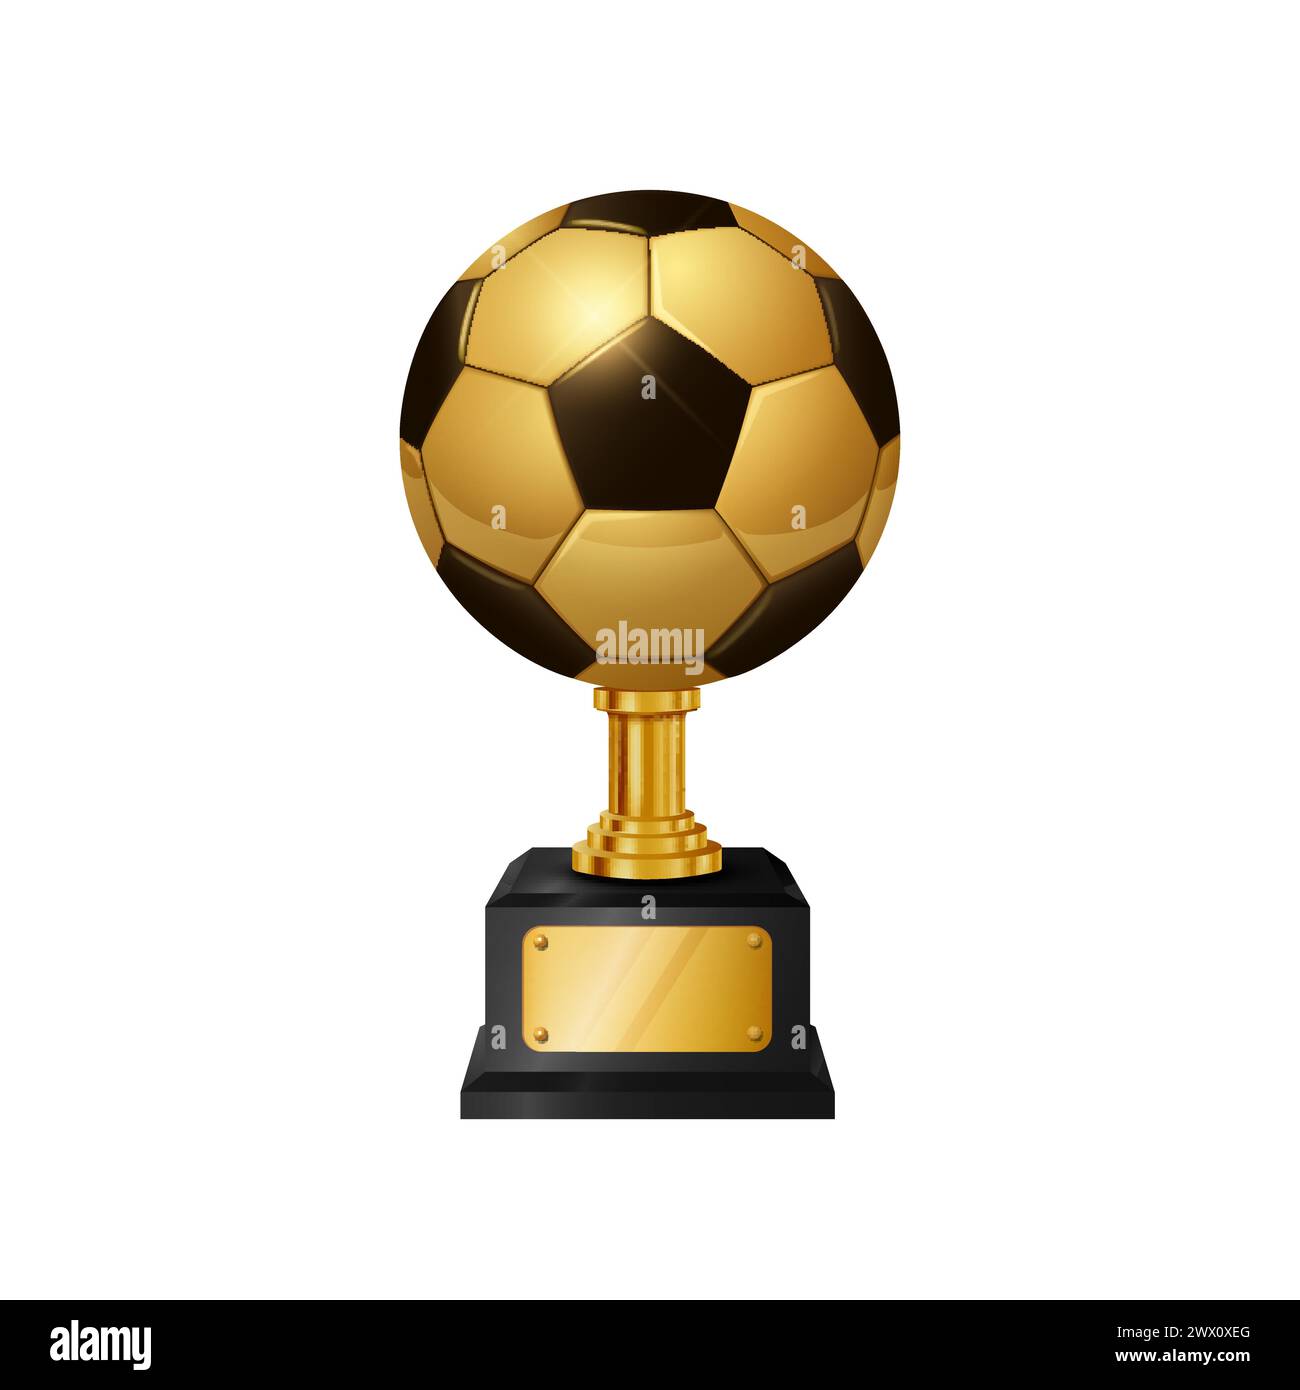 Realistic Gold Soccer Ball Trophy, Isolated on White Background, Vector Illustration Stock Vector